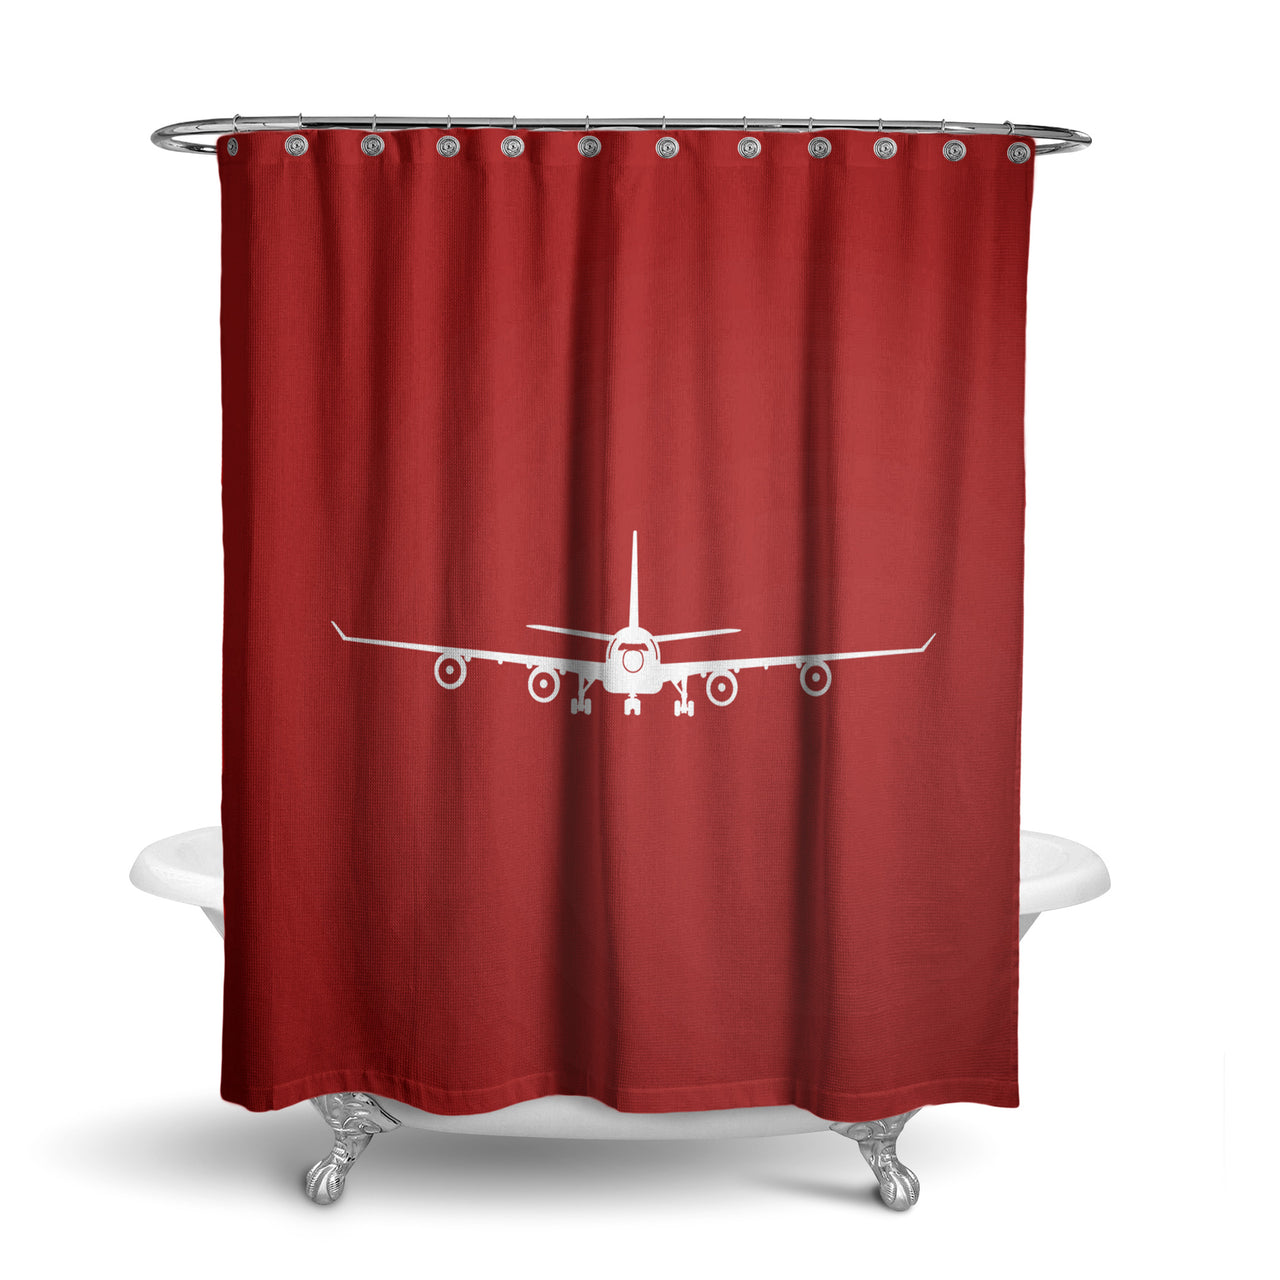 Airbus A340 Silhouette Designed Shower Curtains